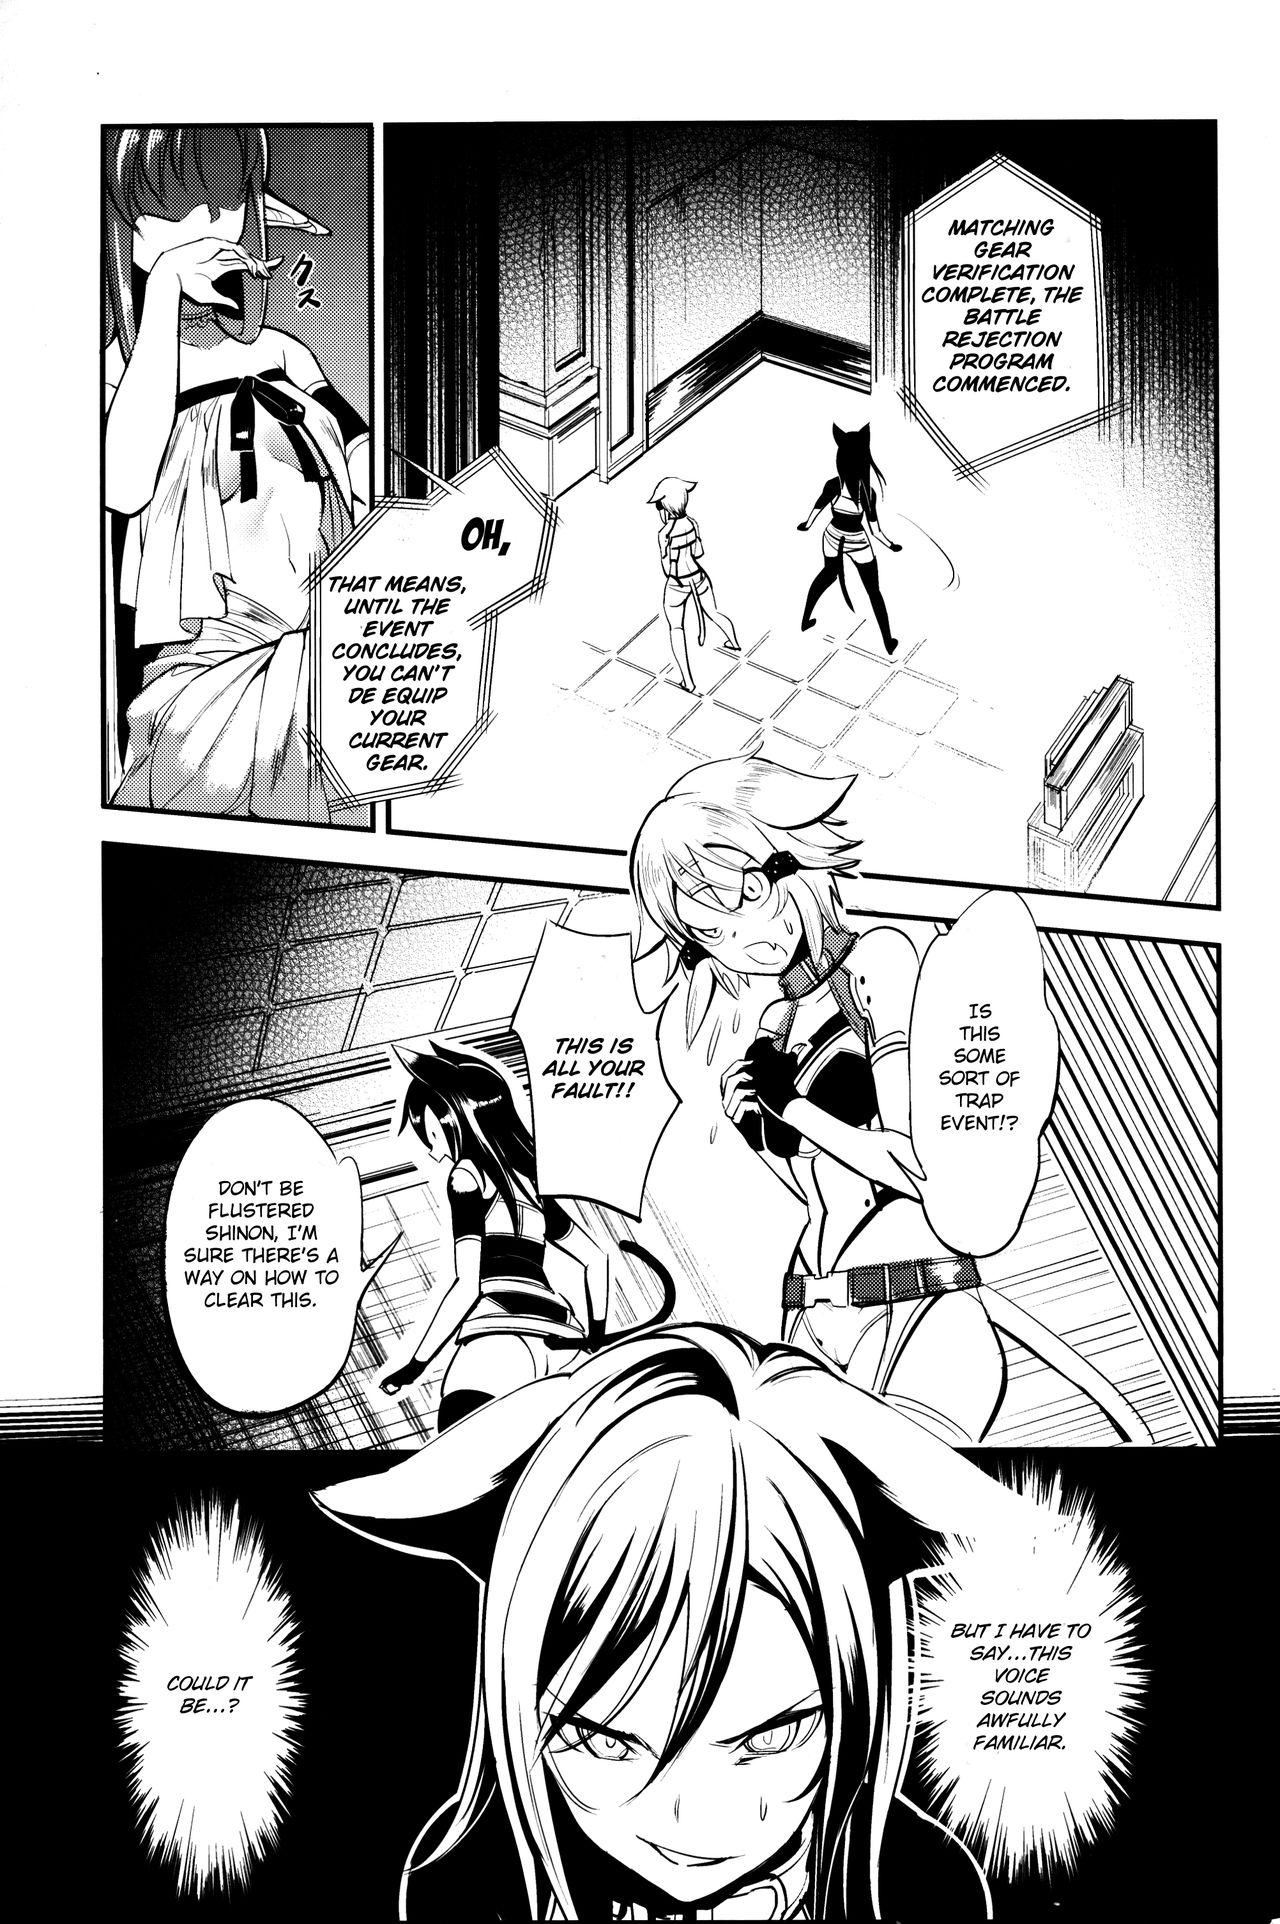 Foot MONSTER HOUSE QUEST - Sword art online Woman Fucking - Page 4